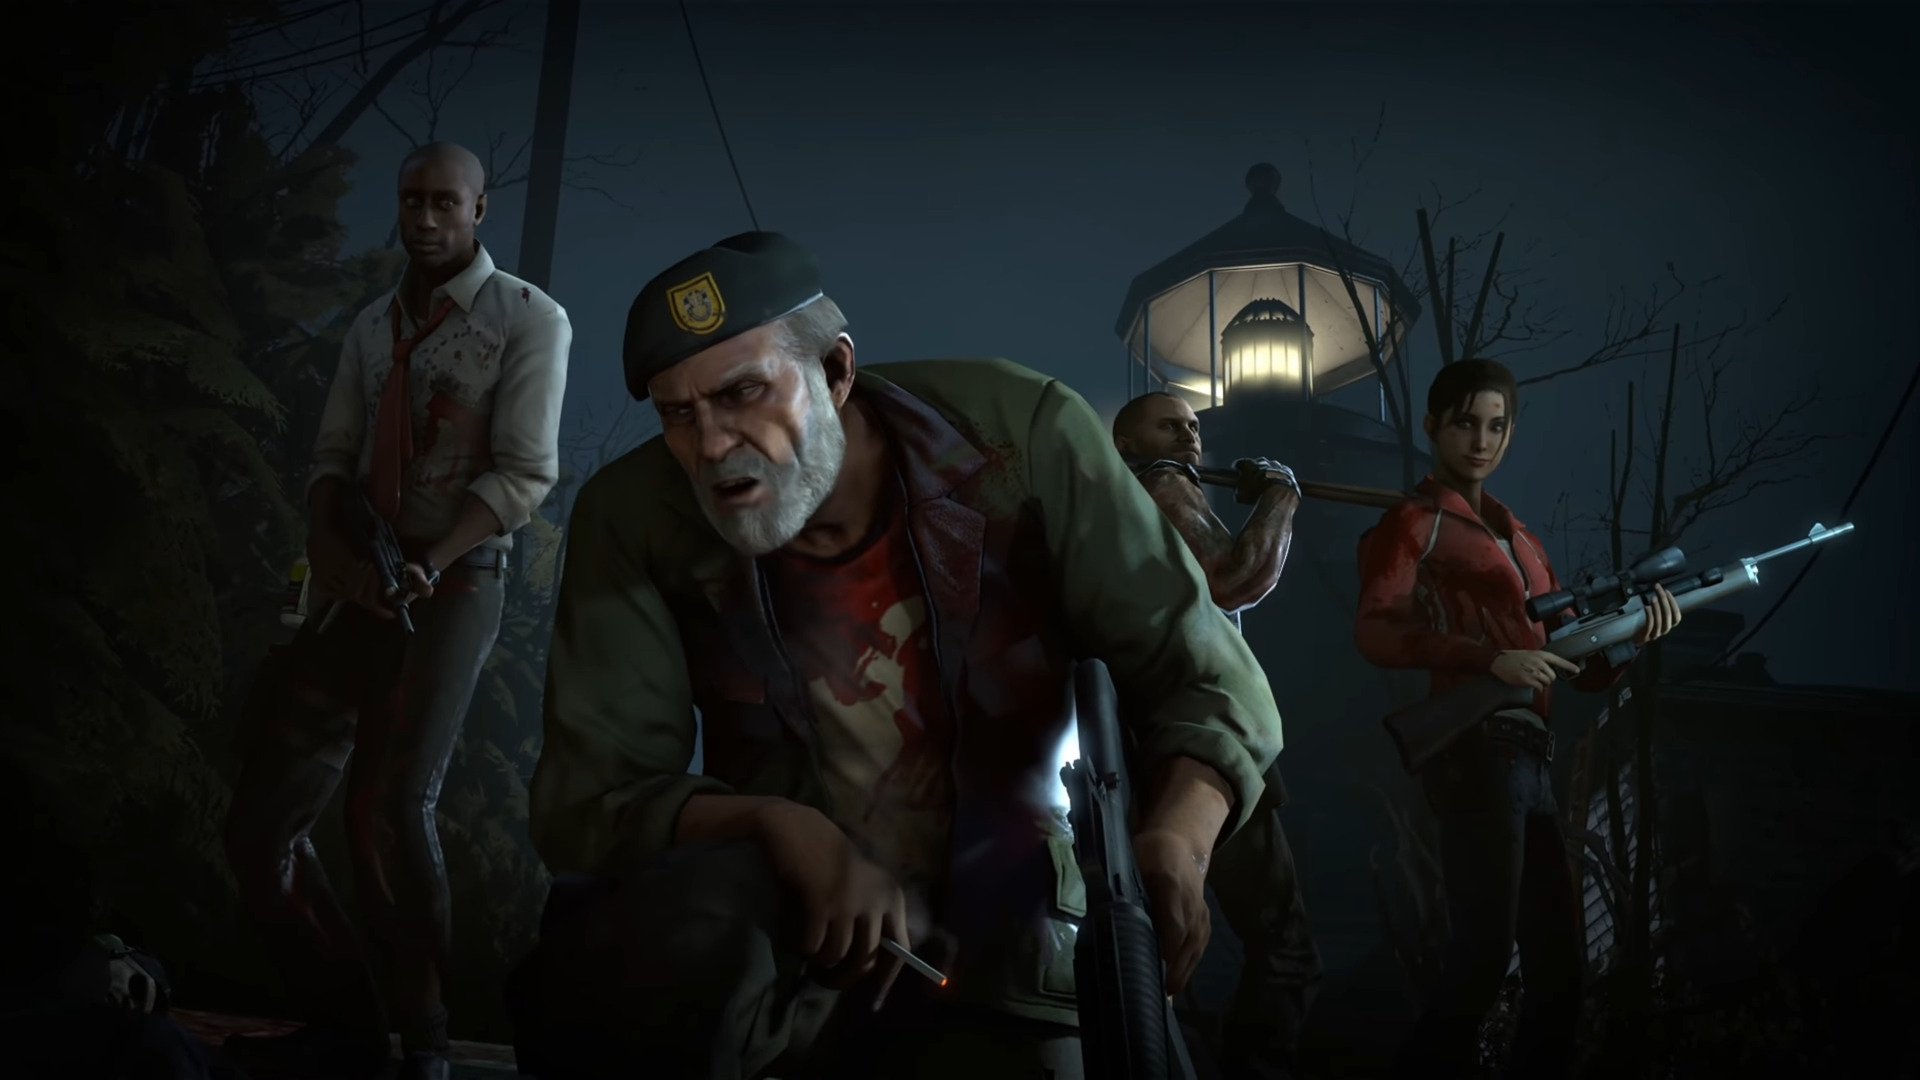 Valve Has Just A Bit More Gas In The Tank With Left 4 Dead 2 As They Bring The Last Stand Update